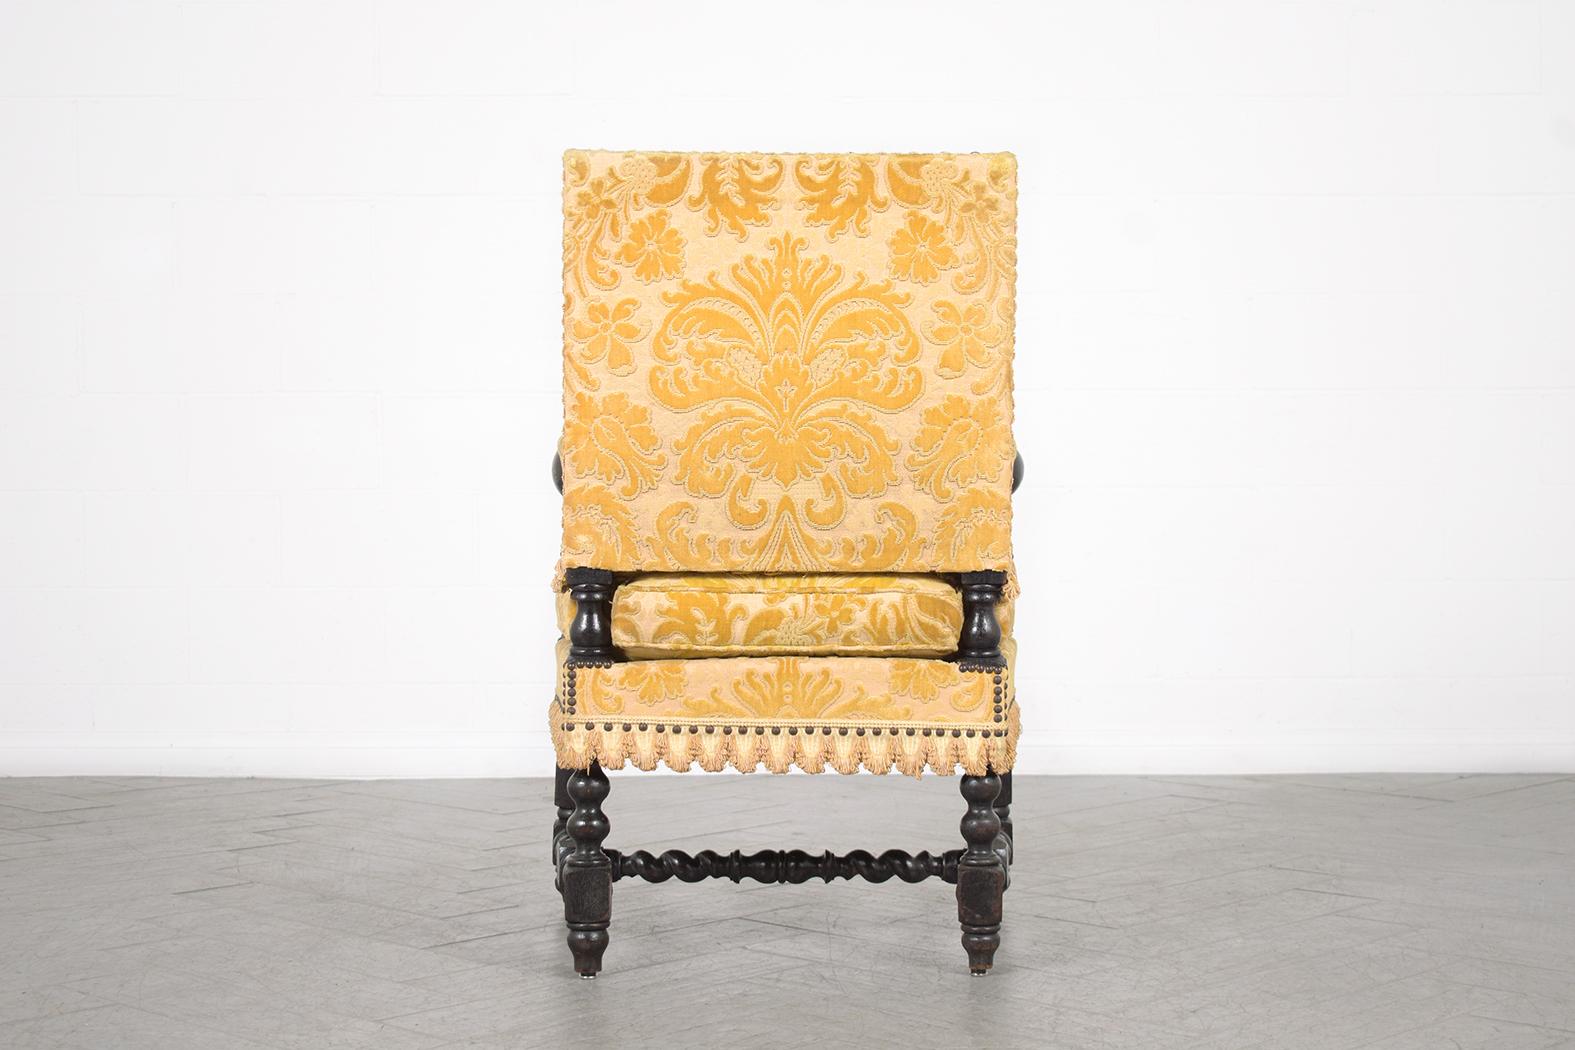 19th Century French Oak Armchair: Dark Walnut Patina Finish & Floral Upholstery For Sale 3